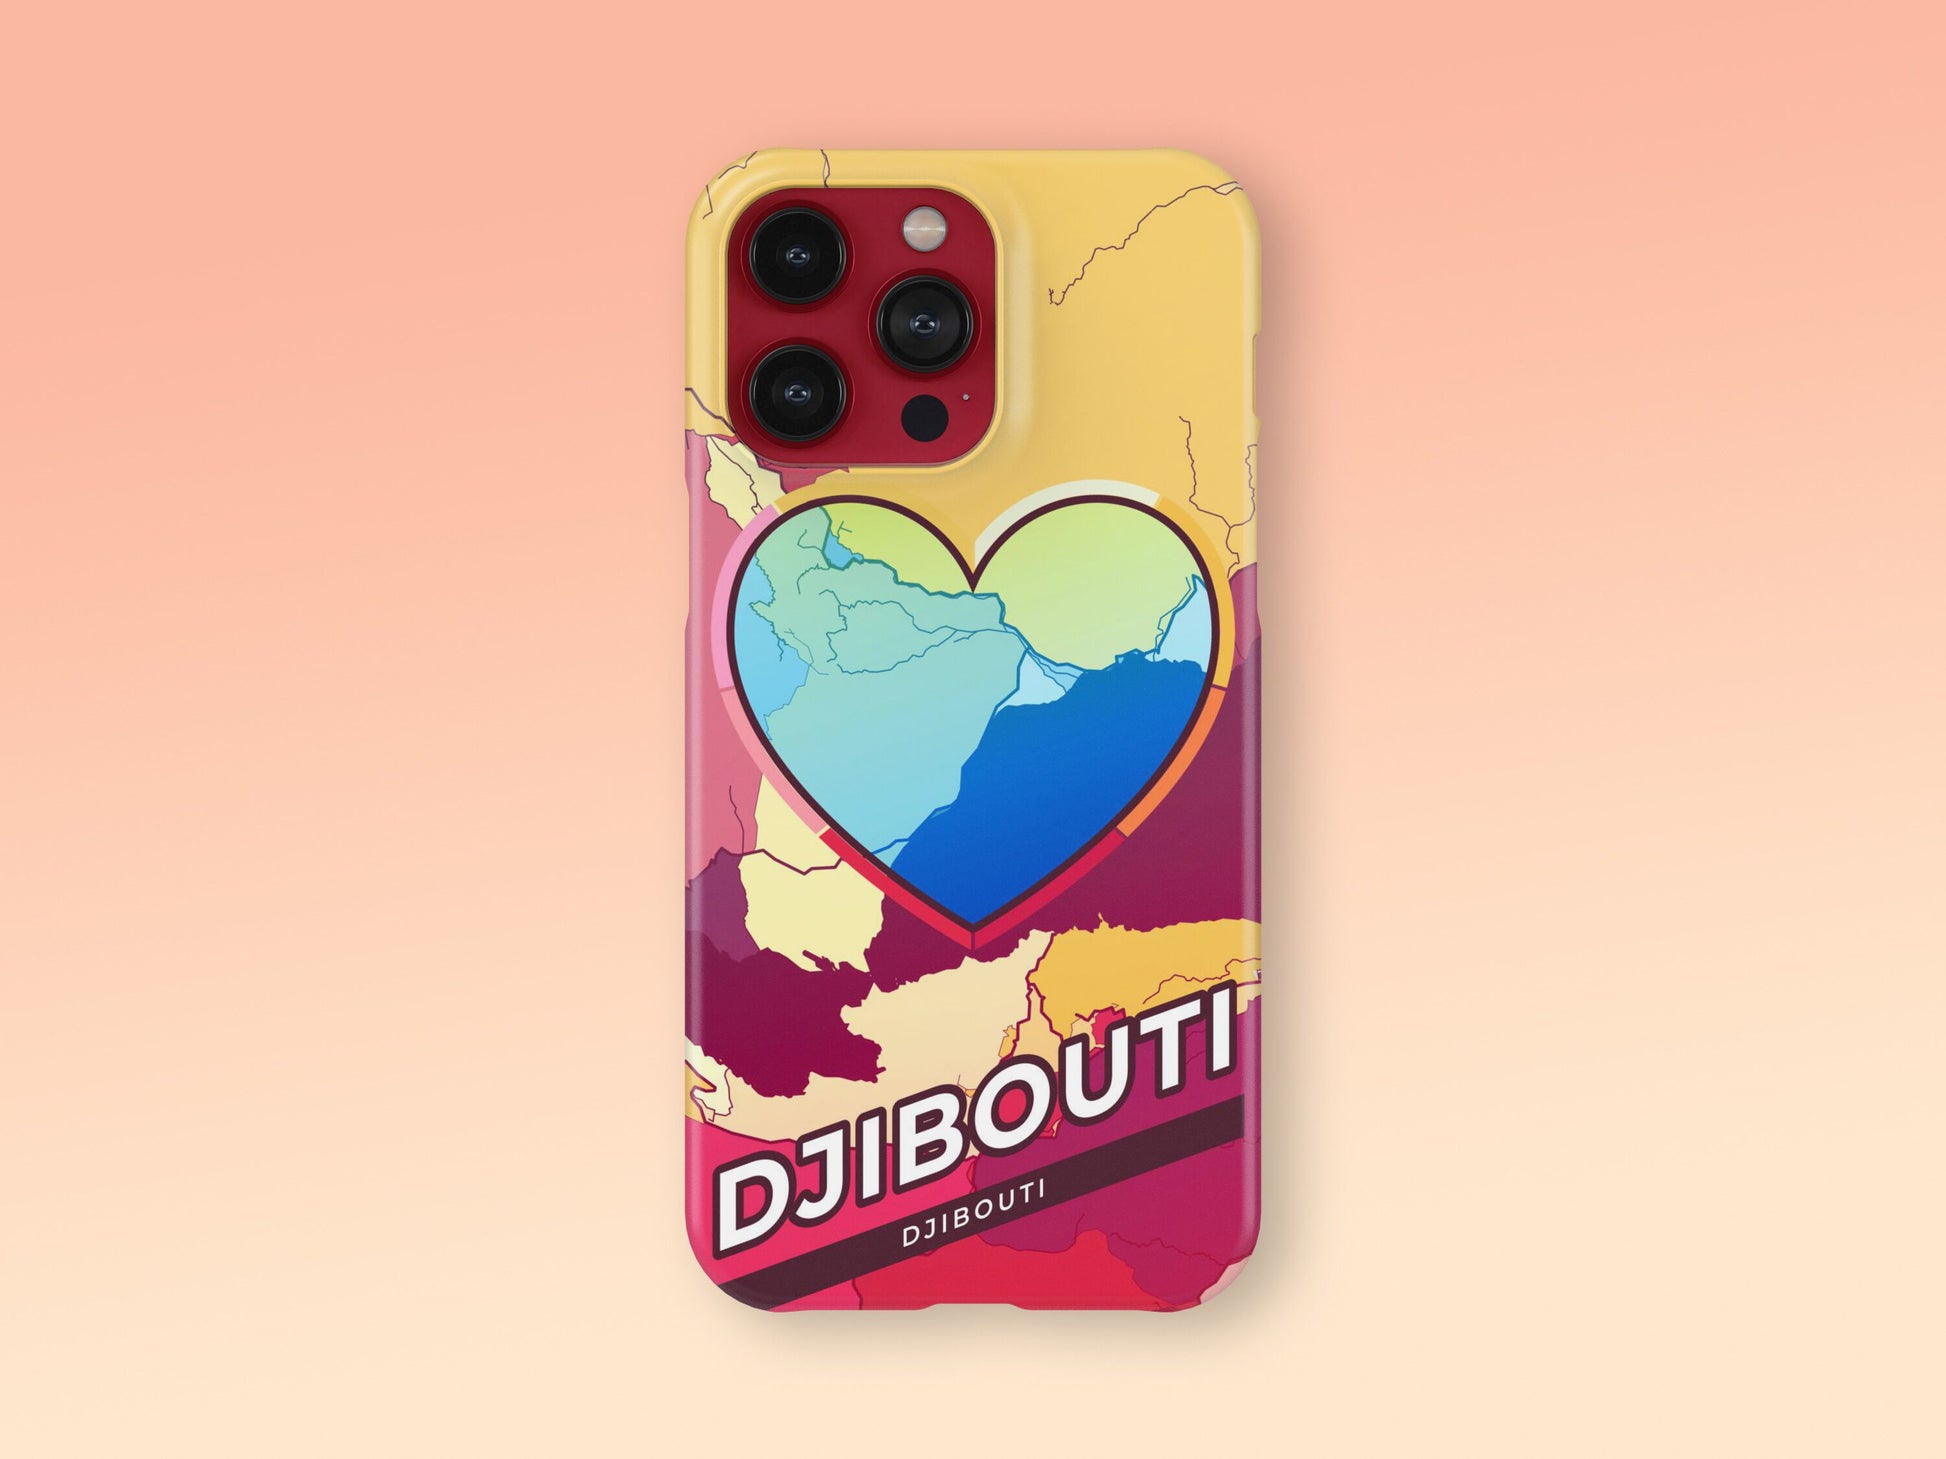 Djibouti Djibouti slim phone case with colorful icon. Birthday, wedding or housewarming gift. Couple match cases. 2